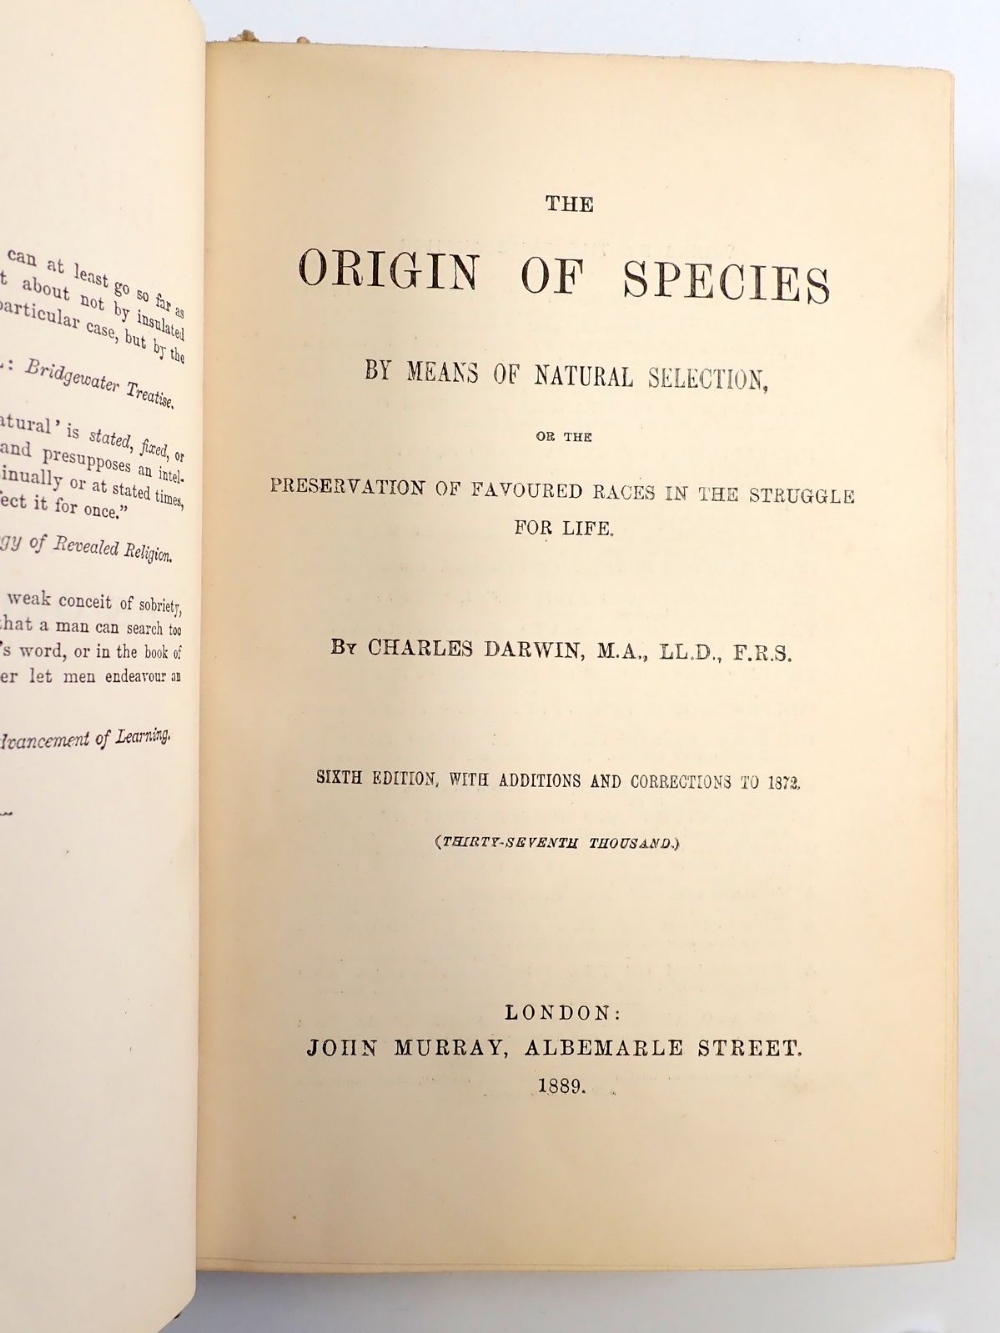 The Origin of the Species by Charles Darwin, sixth edition with additions and corrections to 1872 ( - Image 2 of 2